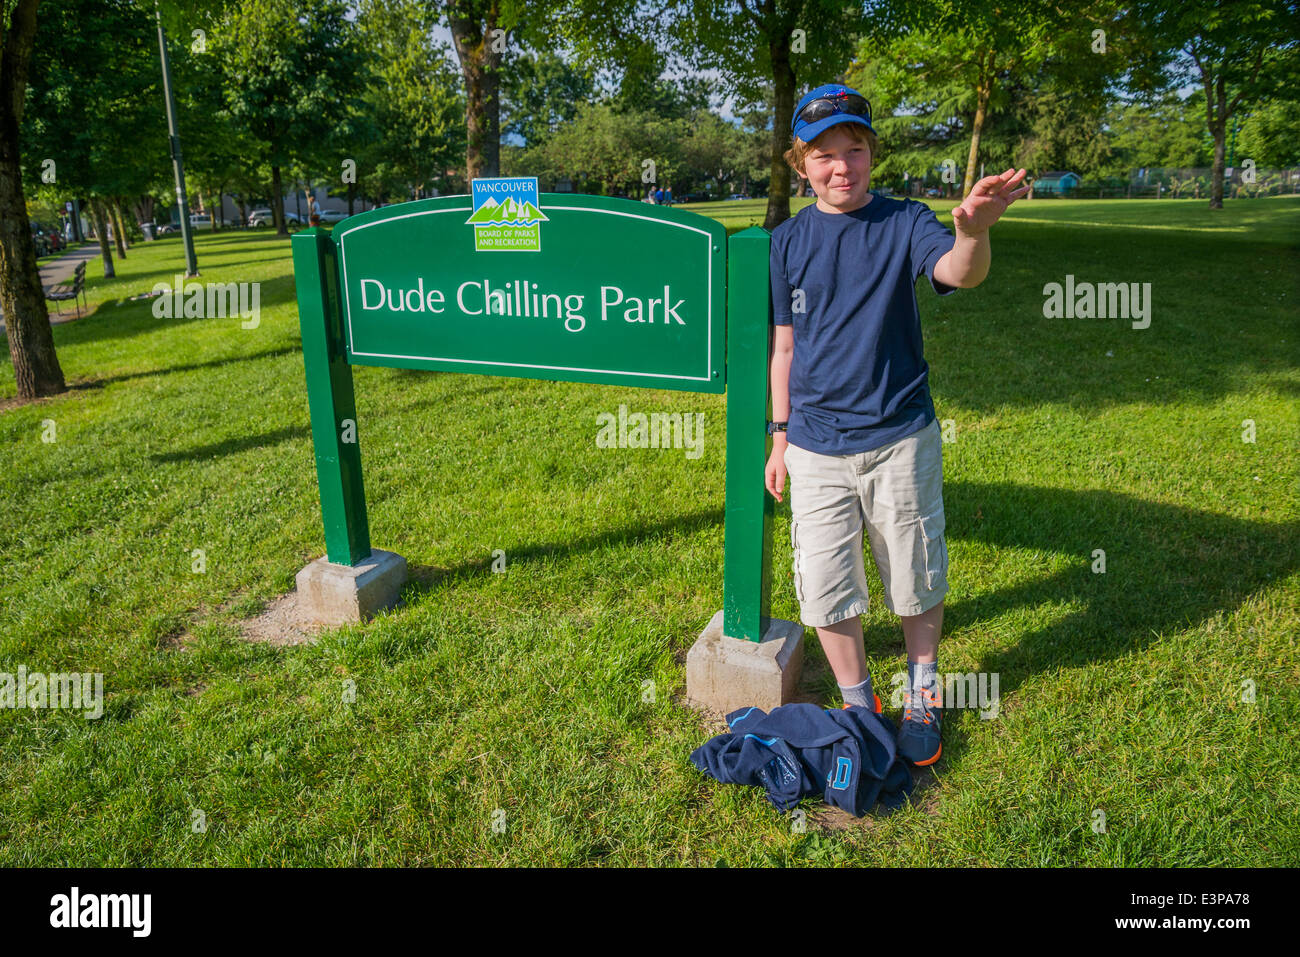 Pre teen by Dude Chilling Park sign, Strathcona, Vancouver, British Columbia, Canada Stock Photo